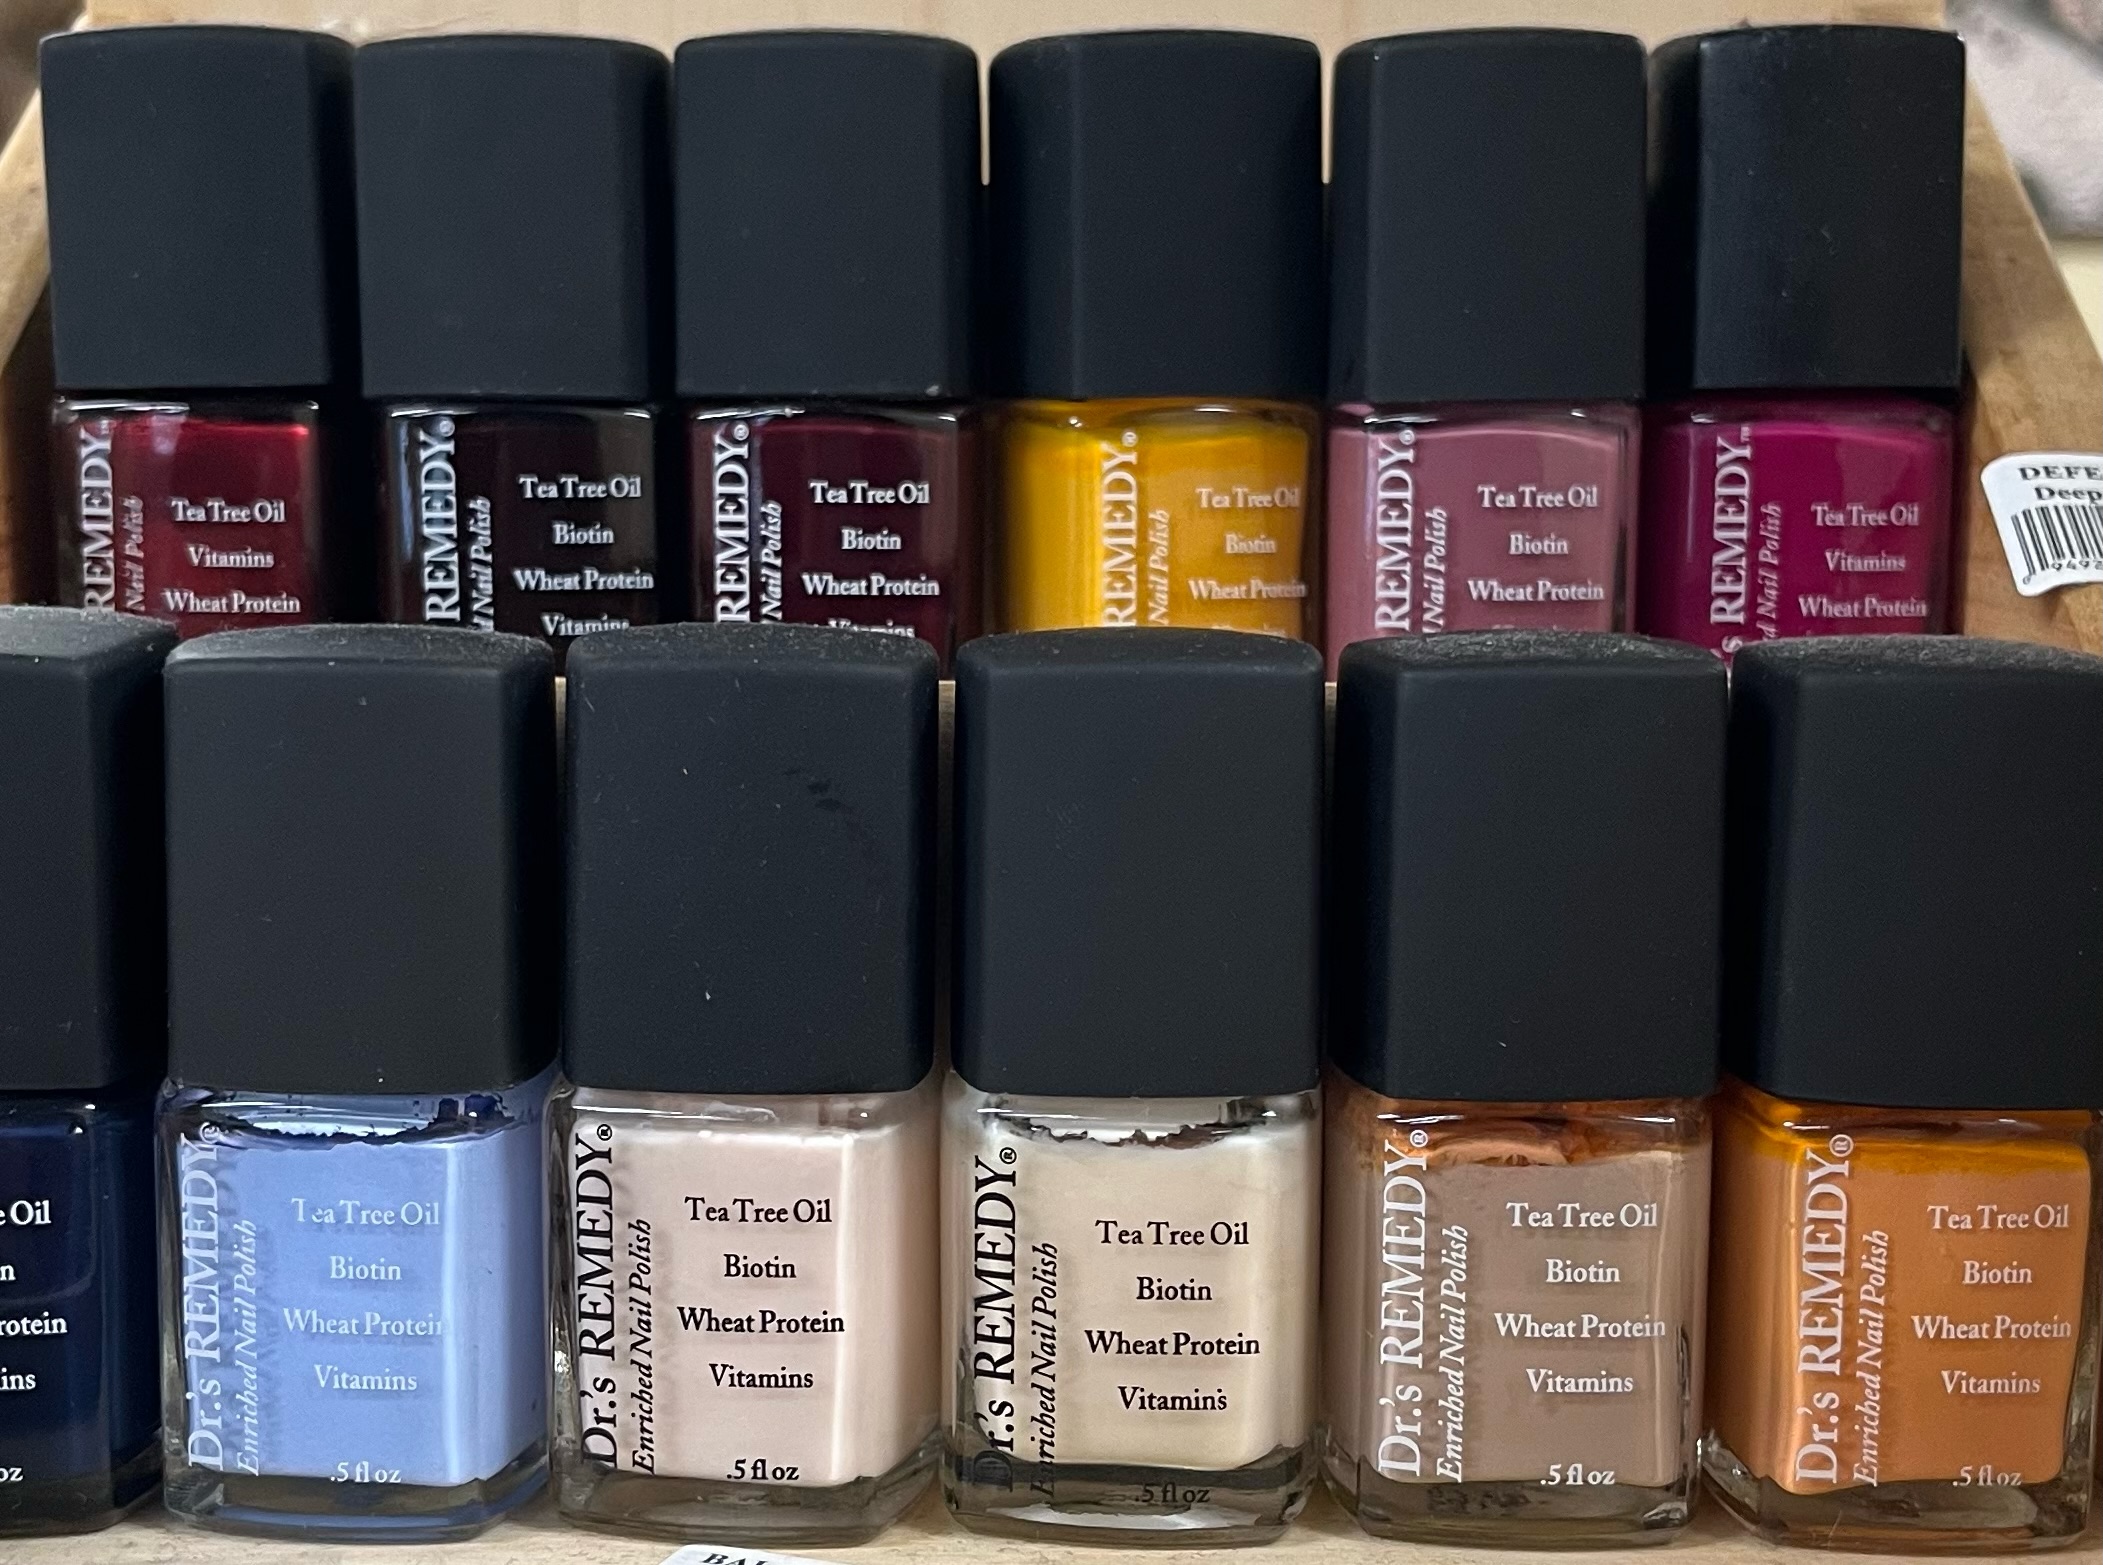 Dr. Remedy Nail Polish Ingredients - wide 5